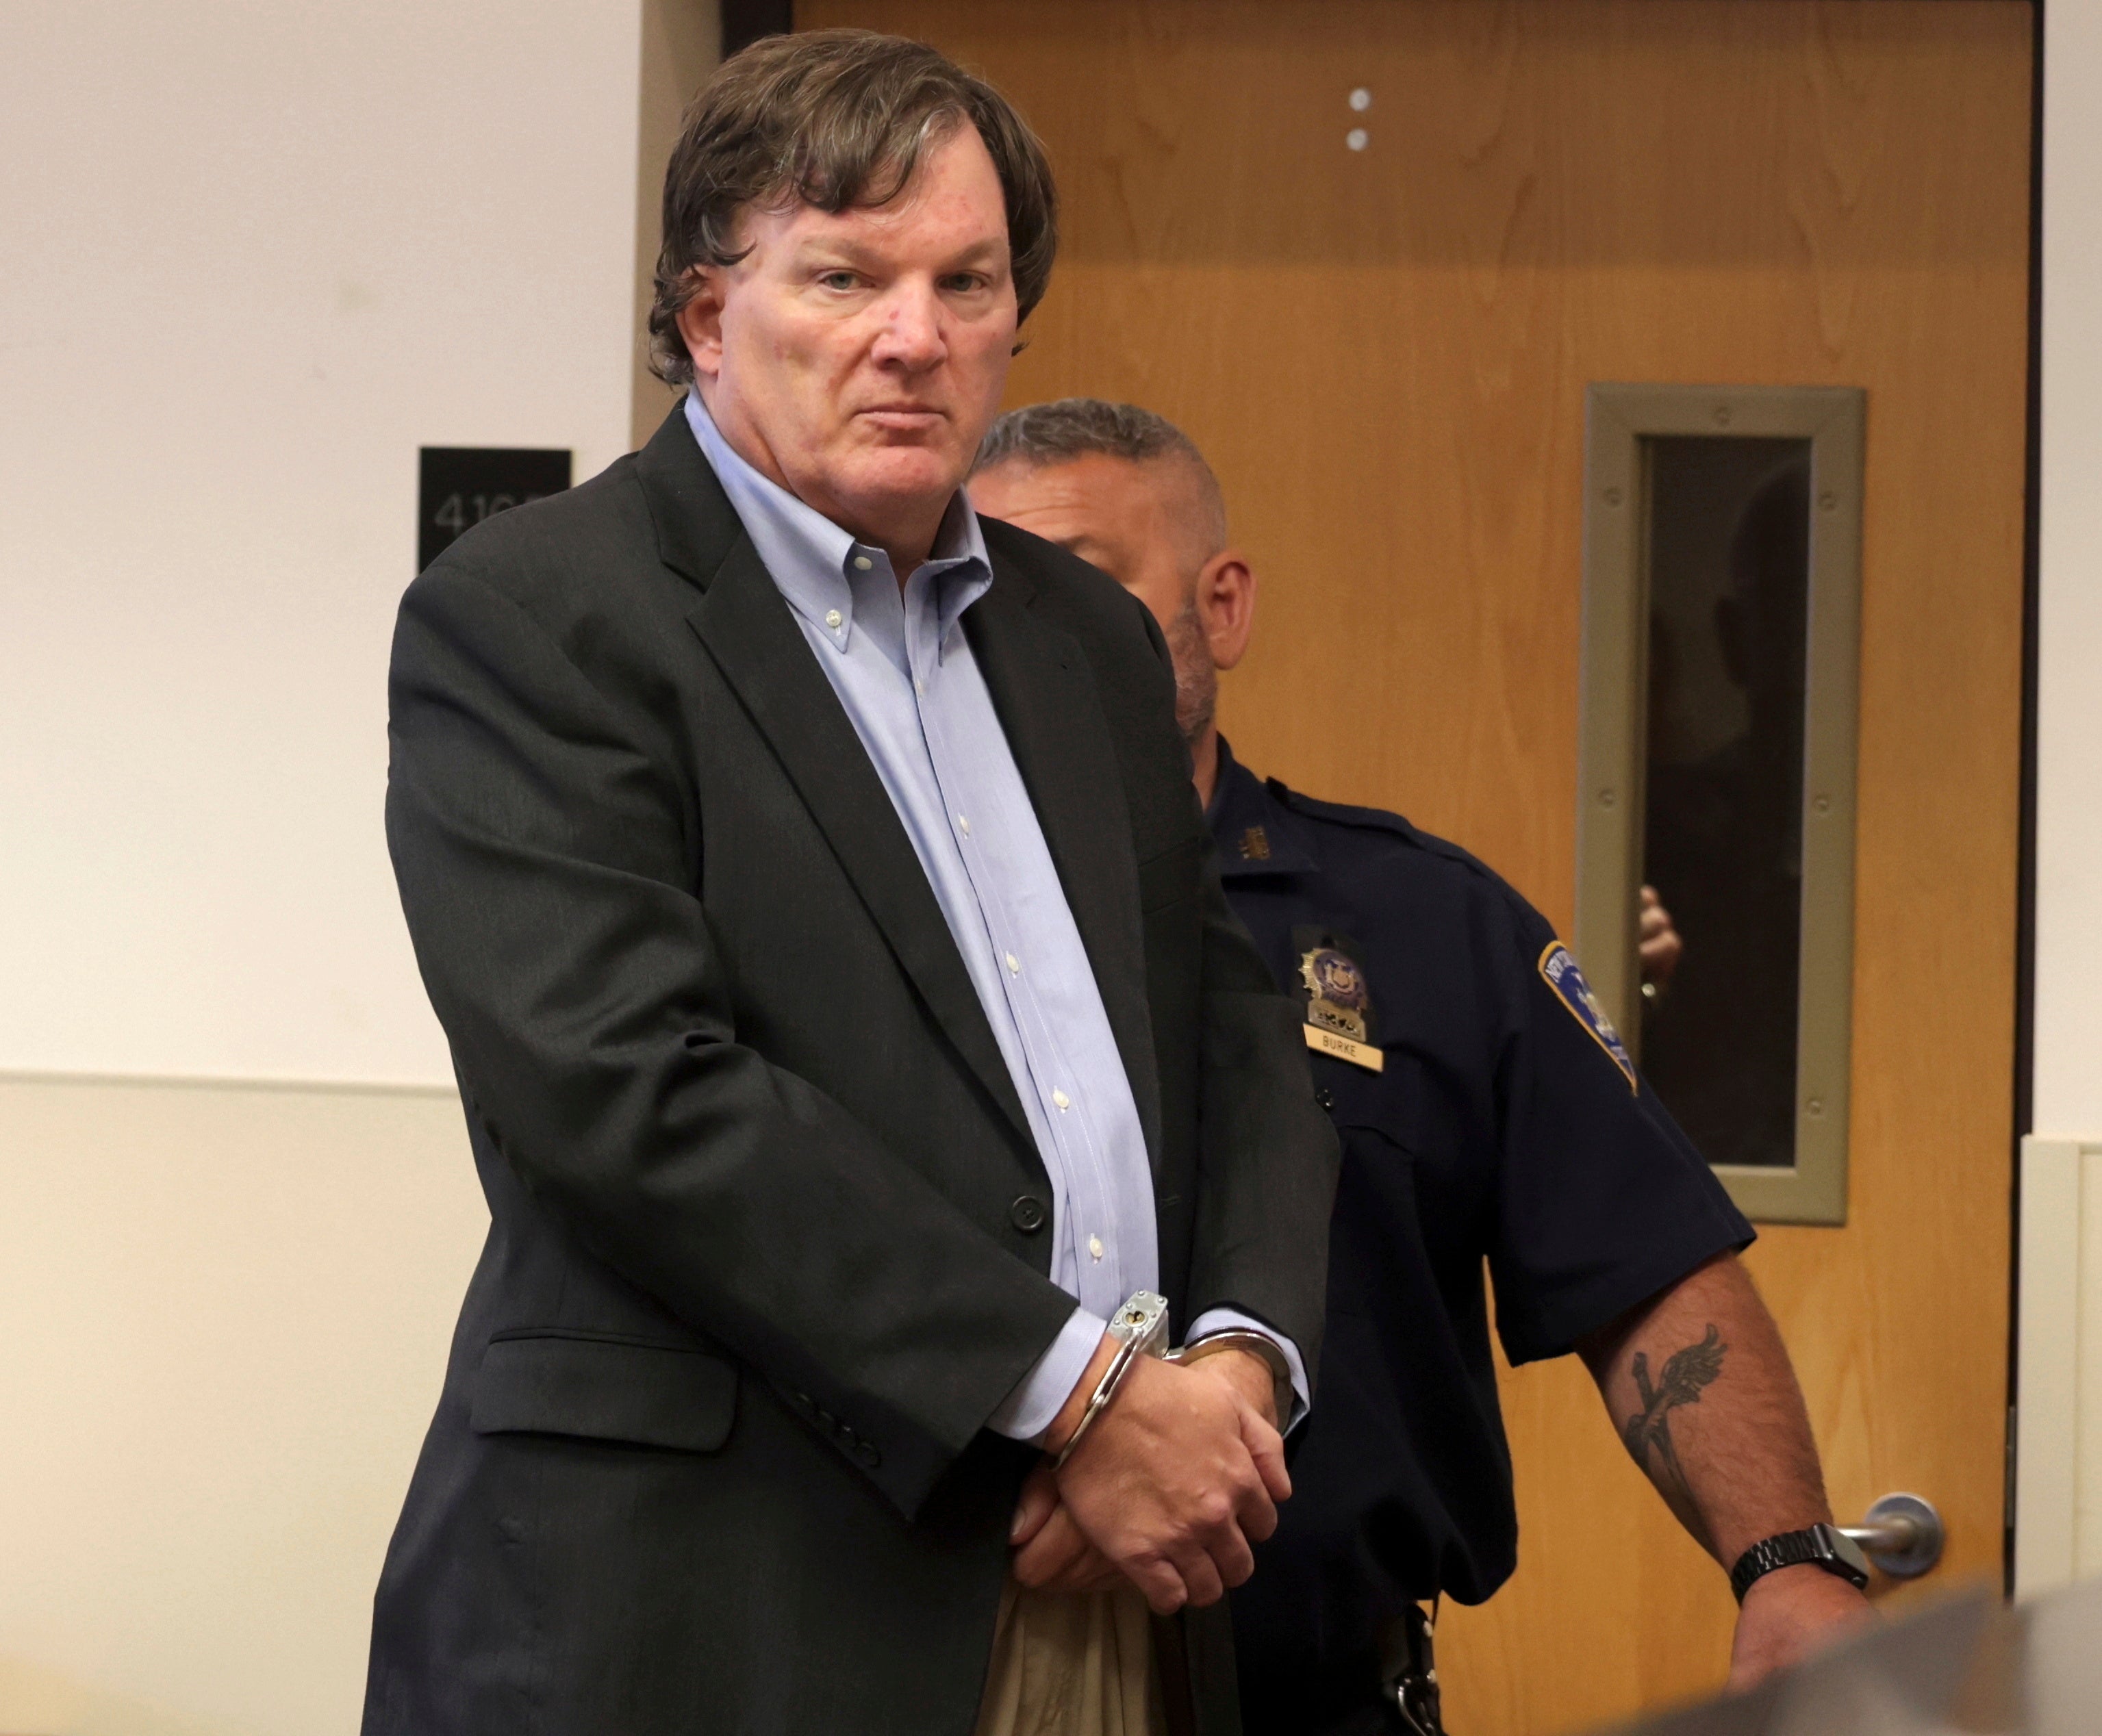 Rex Heuermann, the architect accused of murdering at least three women near Long Island’s Gilgo Beach, appears in court